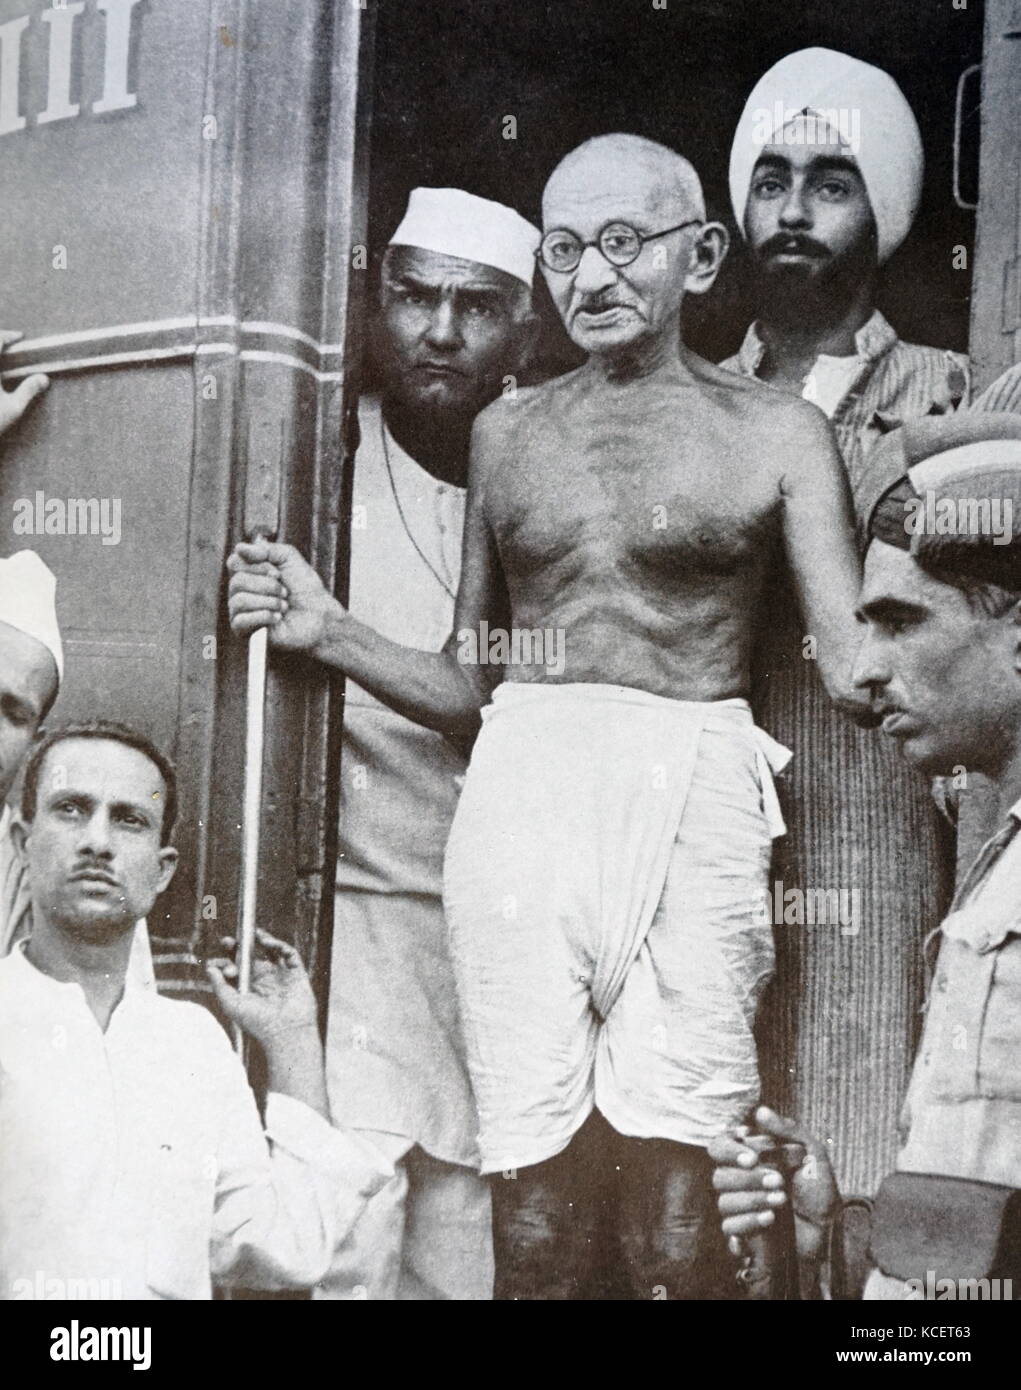 Gandhi visits Lahore 1947. Mohandas Karamchand Gandhi (2 October 1869 – 30 January 1948), was the preeminent leader of the Indian independence movement in British-ruled India. Stock Photo